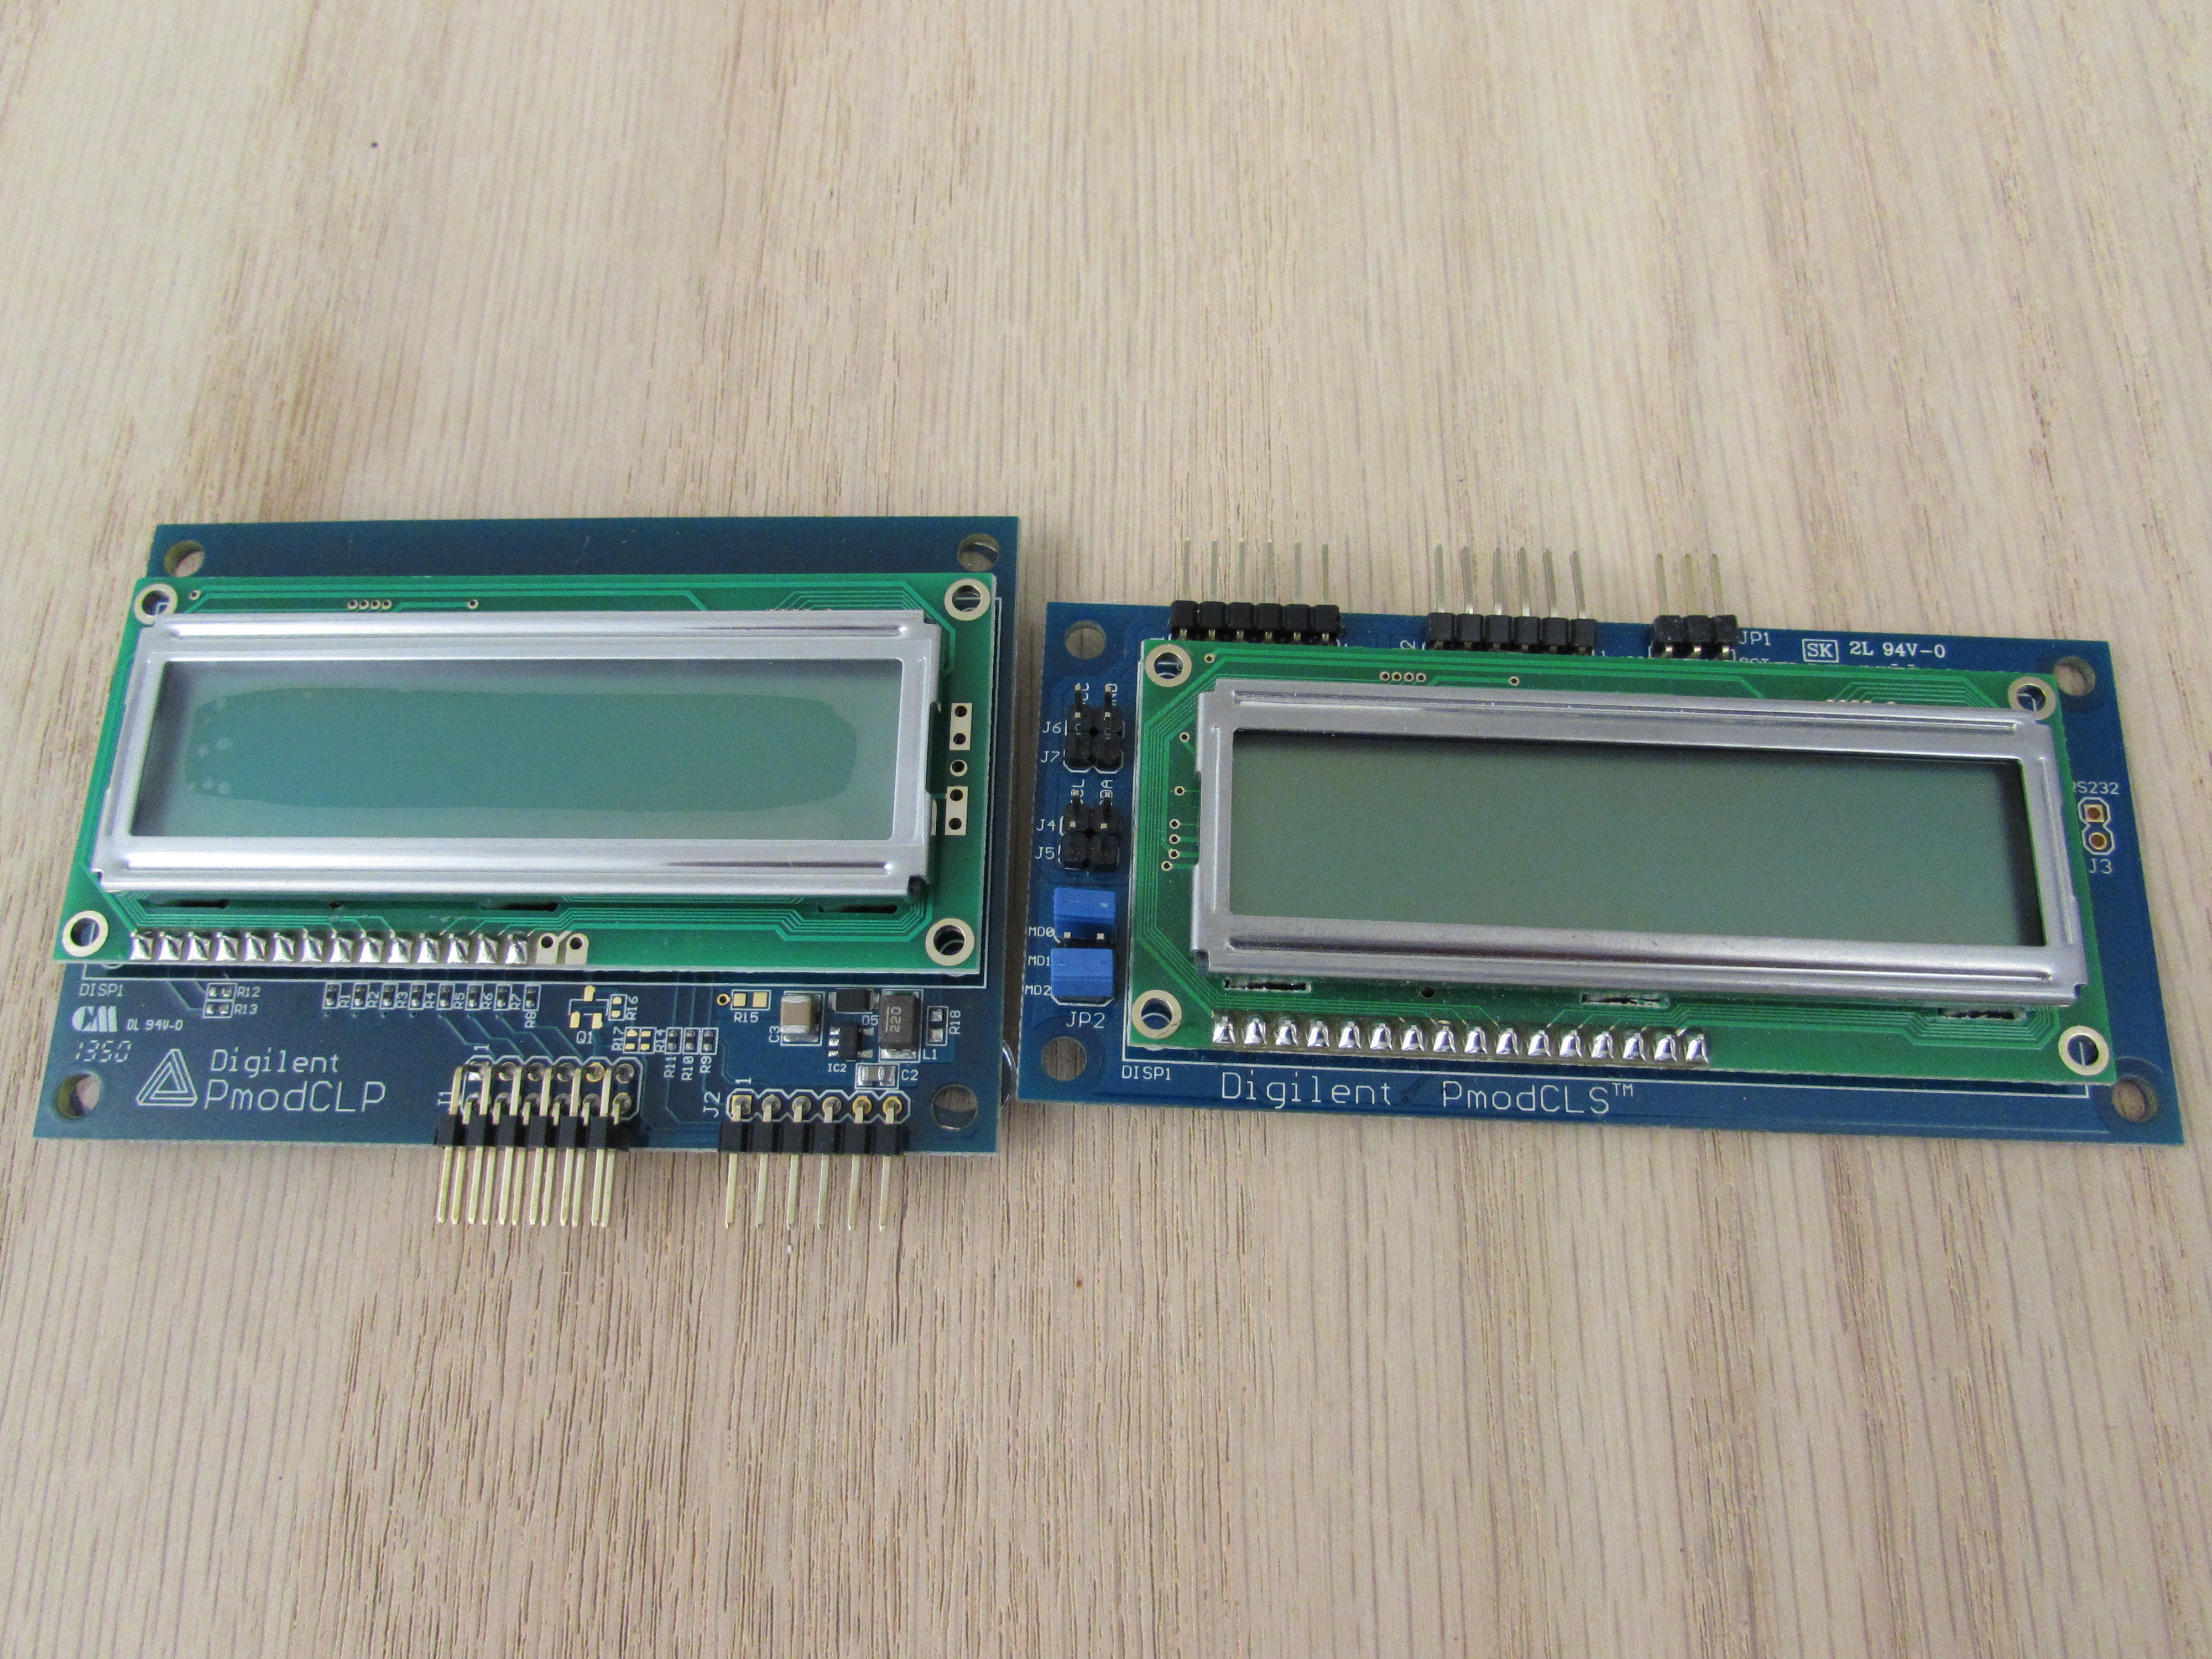 Digilent's two LCD modules: the PmodCLP and the PmodCLS